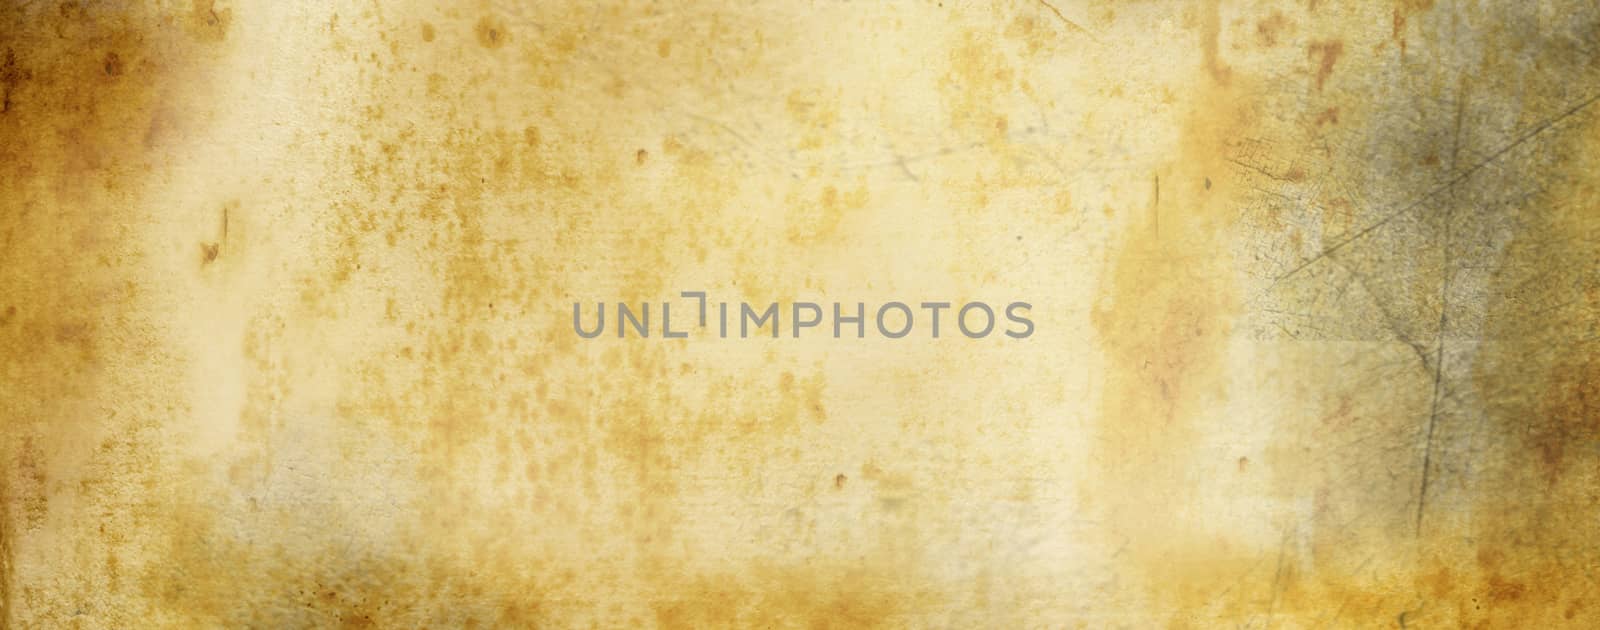 vintage paper stained background with ink